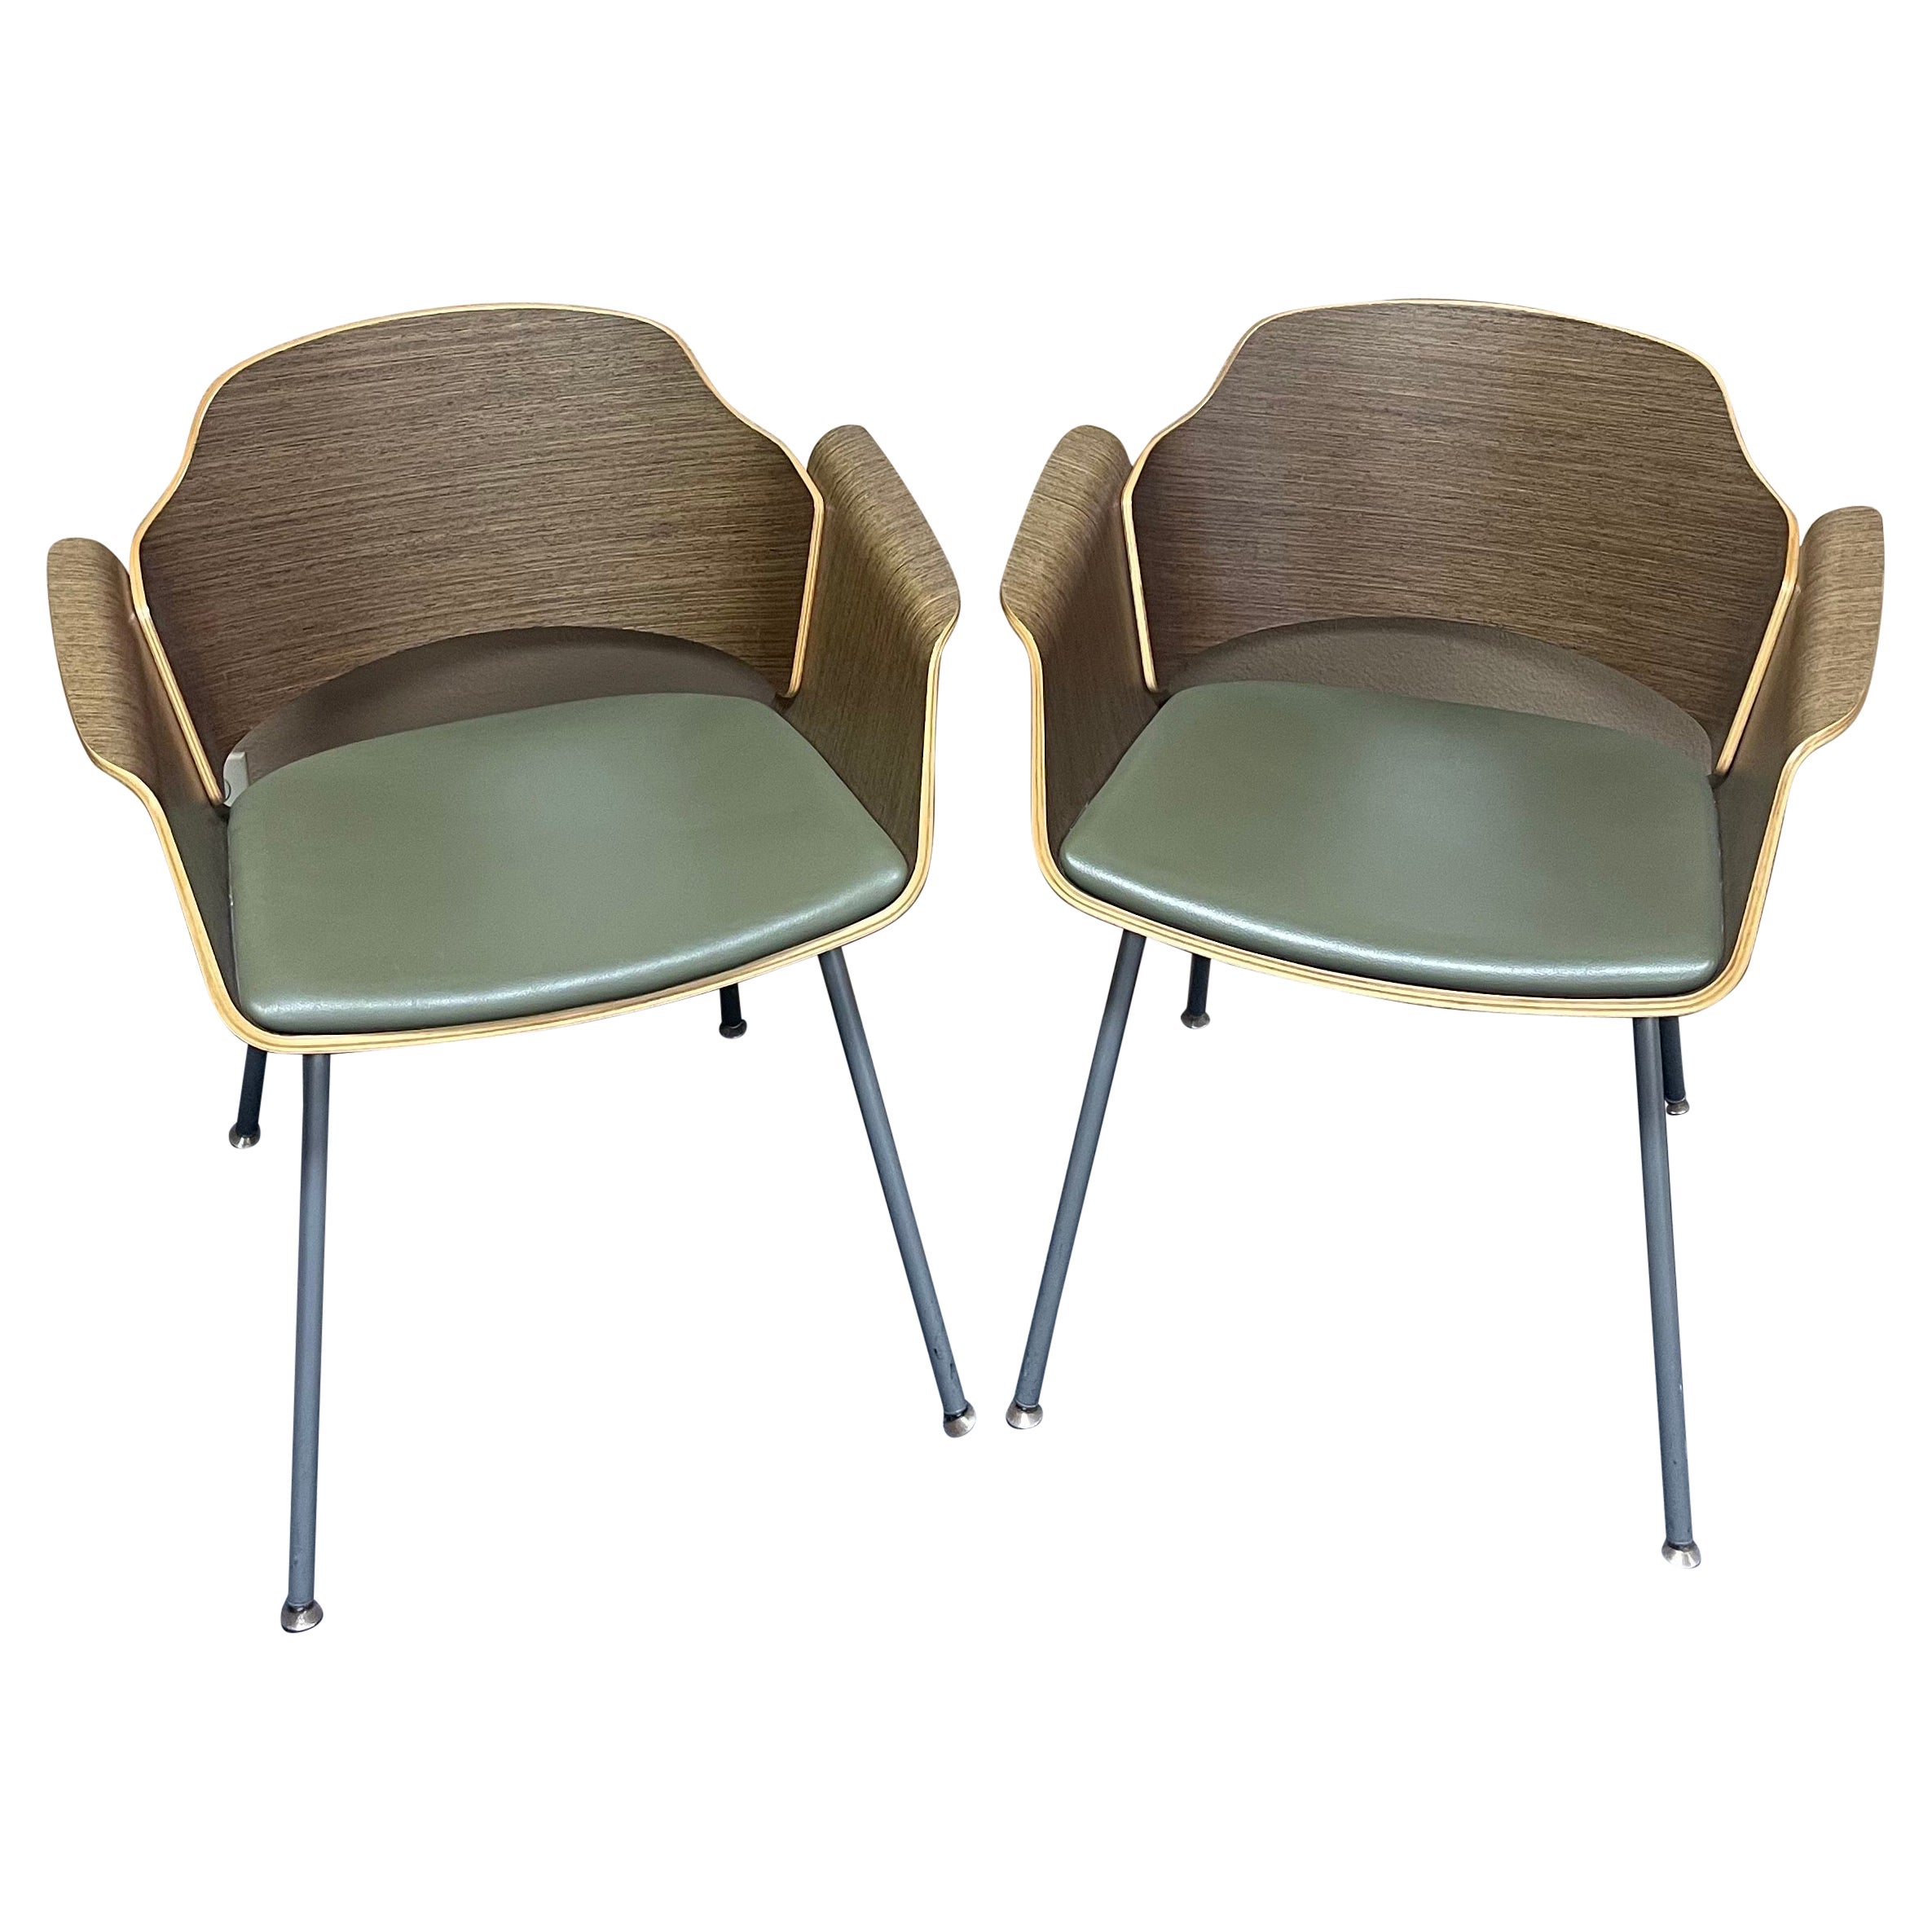 Pair of Vintage Bent Wood Lounge Chairs by Stylex